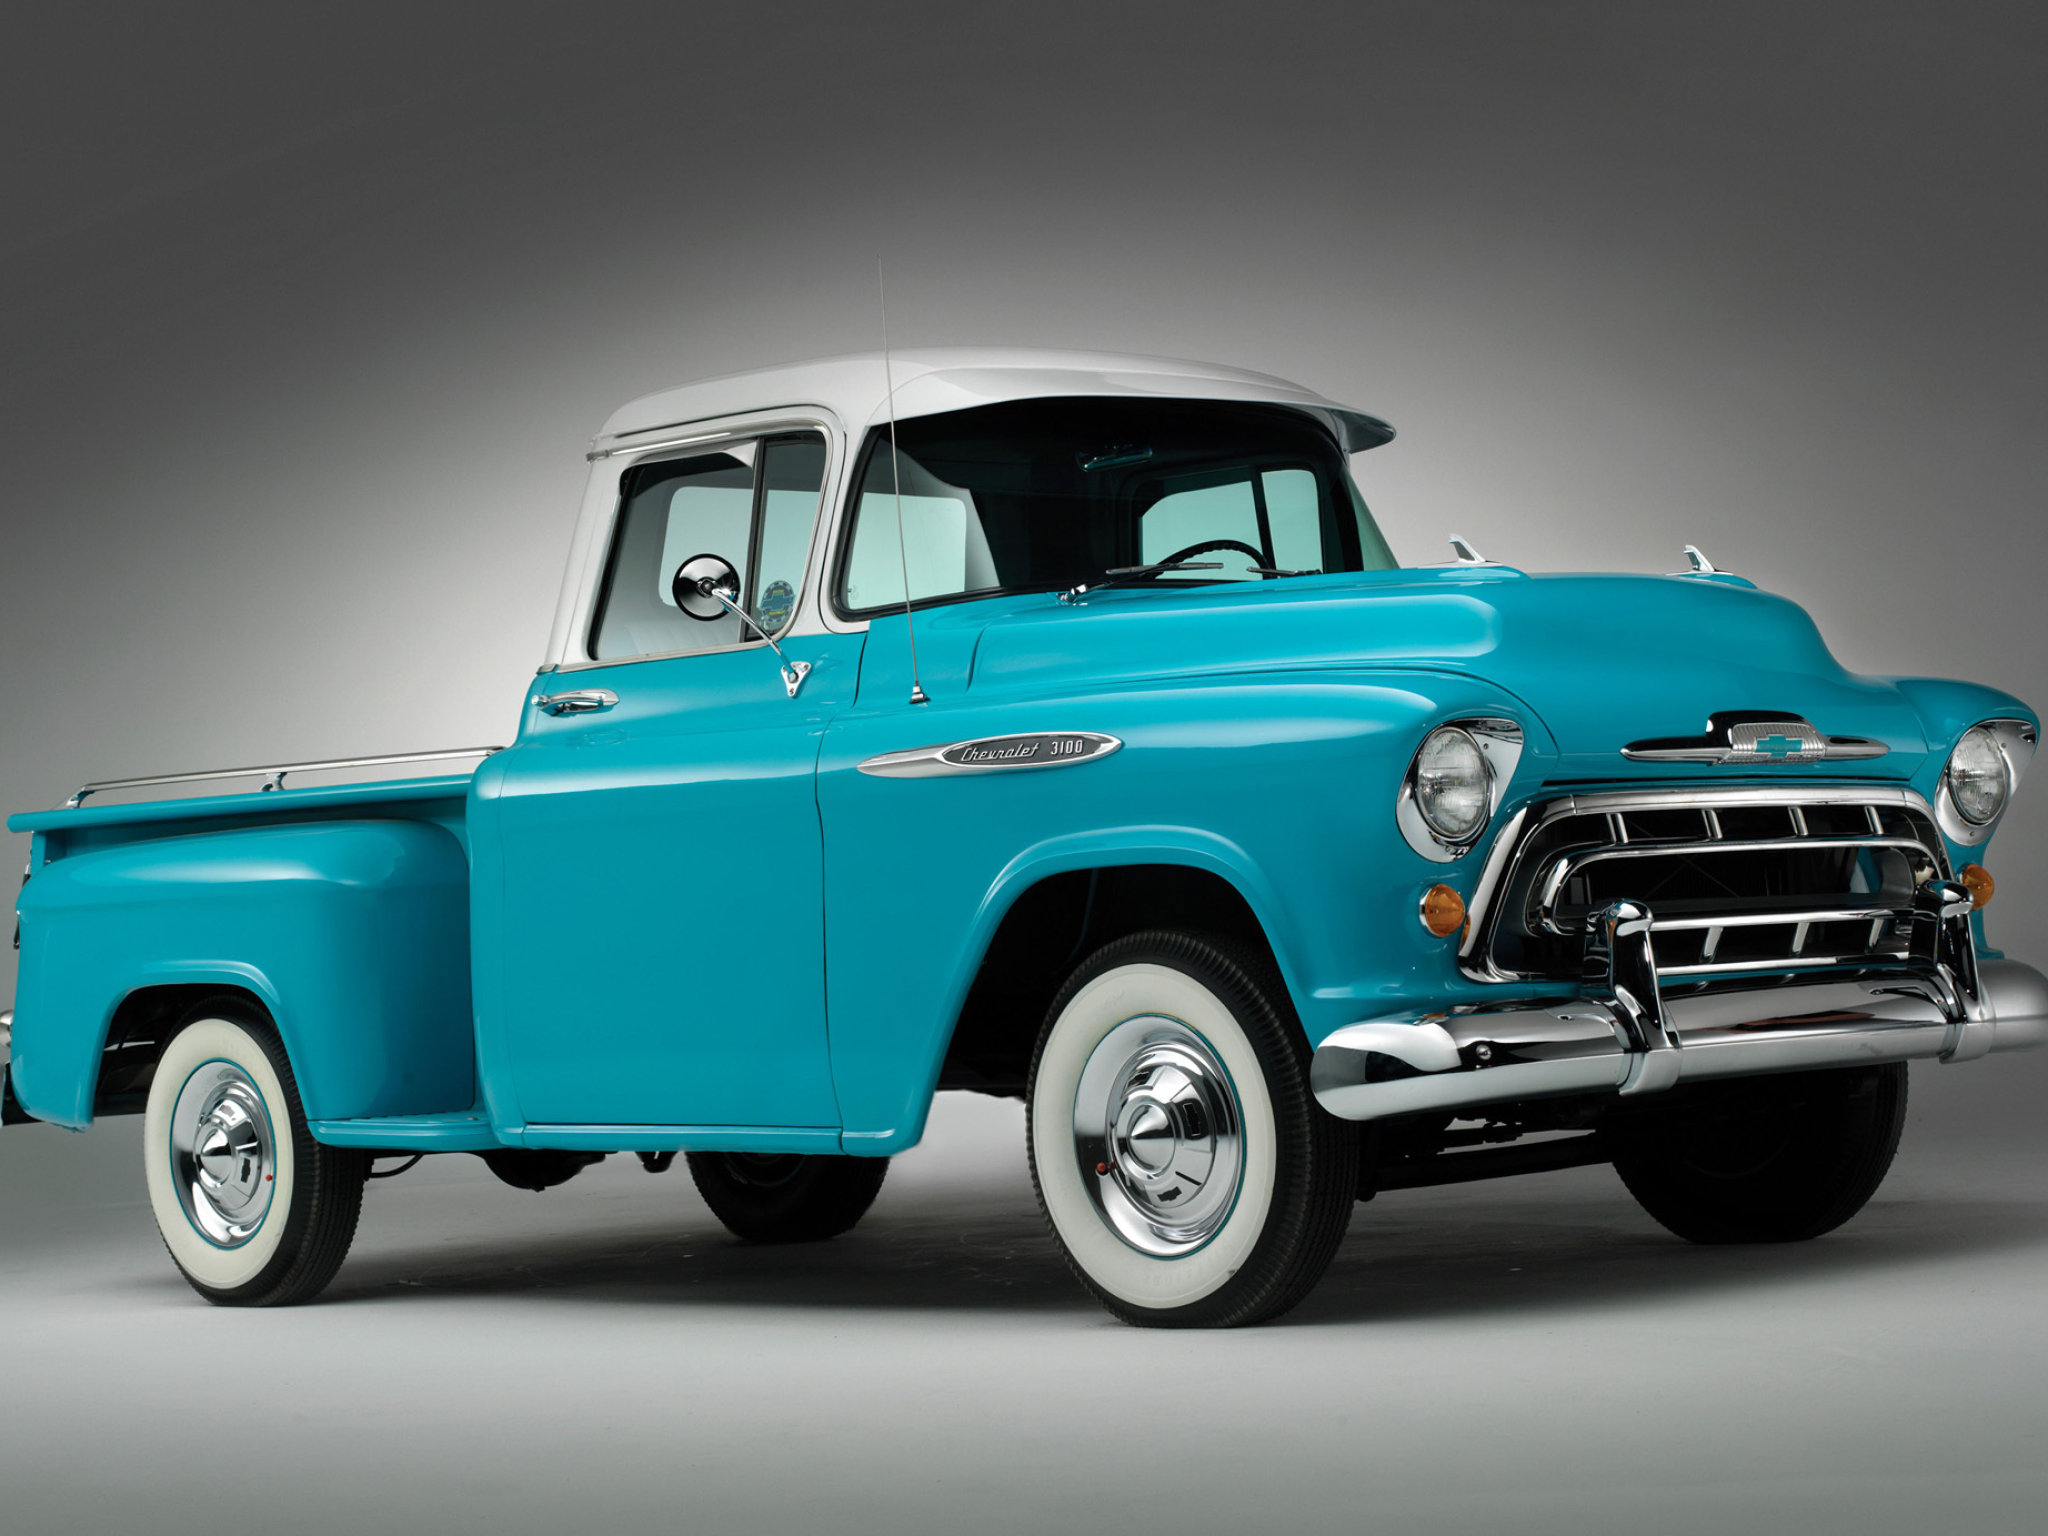 2048x1536 Free download Resize Crop it in available screen resolutions [] for your Desktop, Mobile \u0026 Tablet | Explore 37+ Old Chevy Truck Wallpapers | GM Cars for Background Wallpaper, Chevy Truck Wallpaper